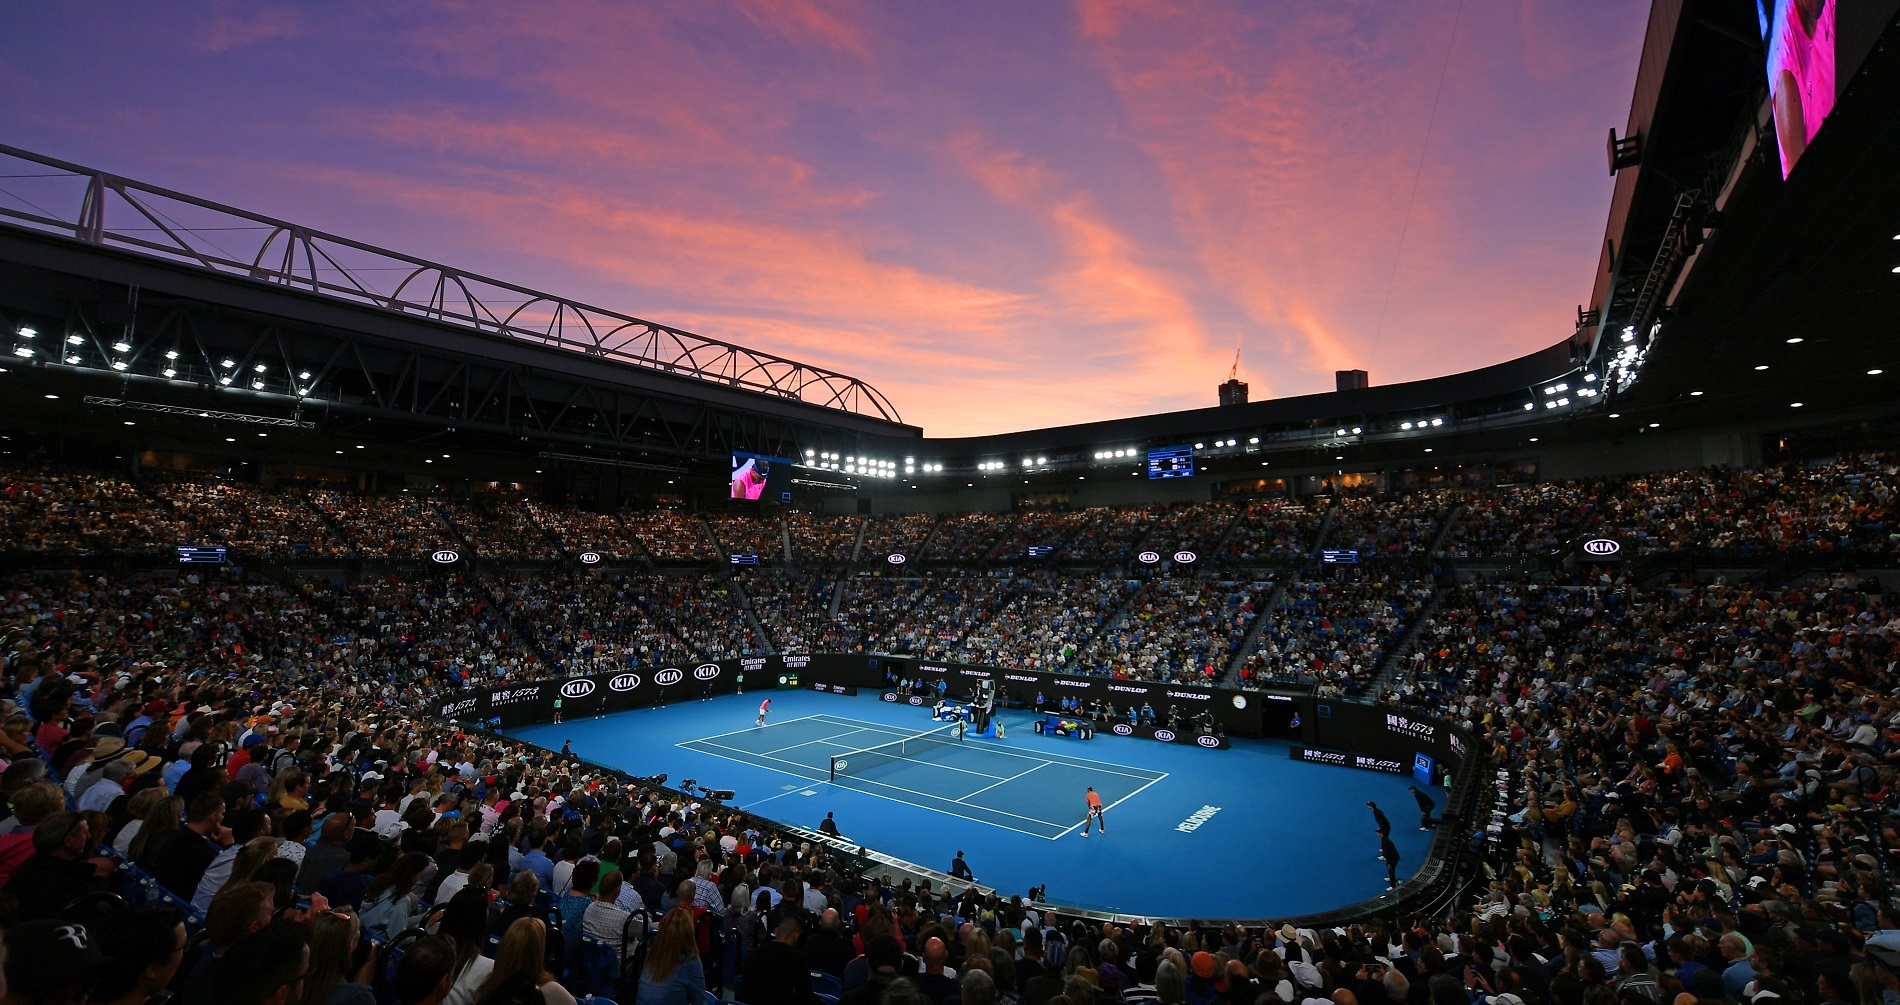 klodset dato udledning 10 questions about the 2021 Australian Open - Tickets, schedule, TV  broadcasts, prize money - Tennis Majors